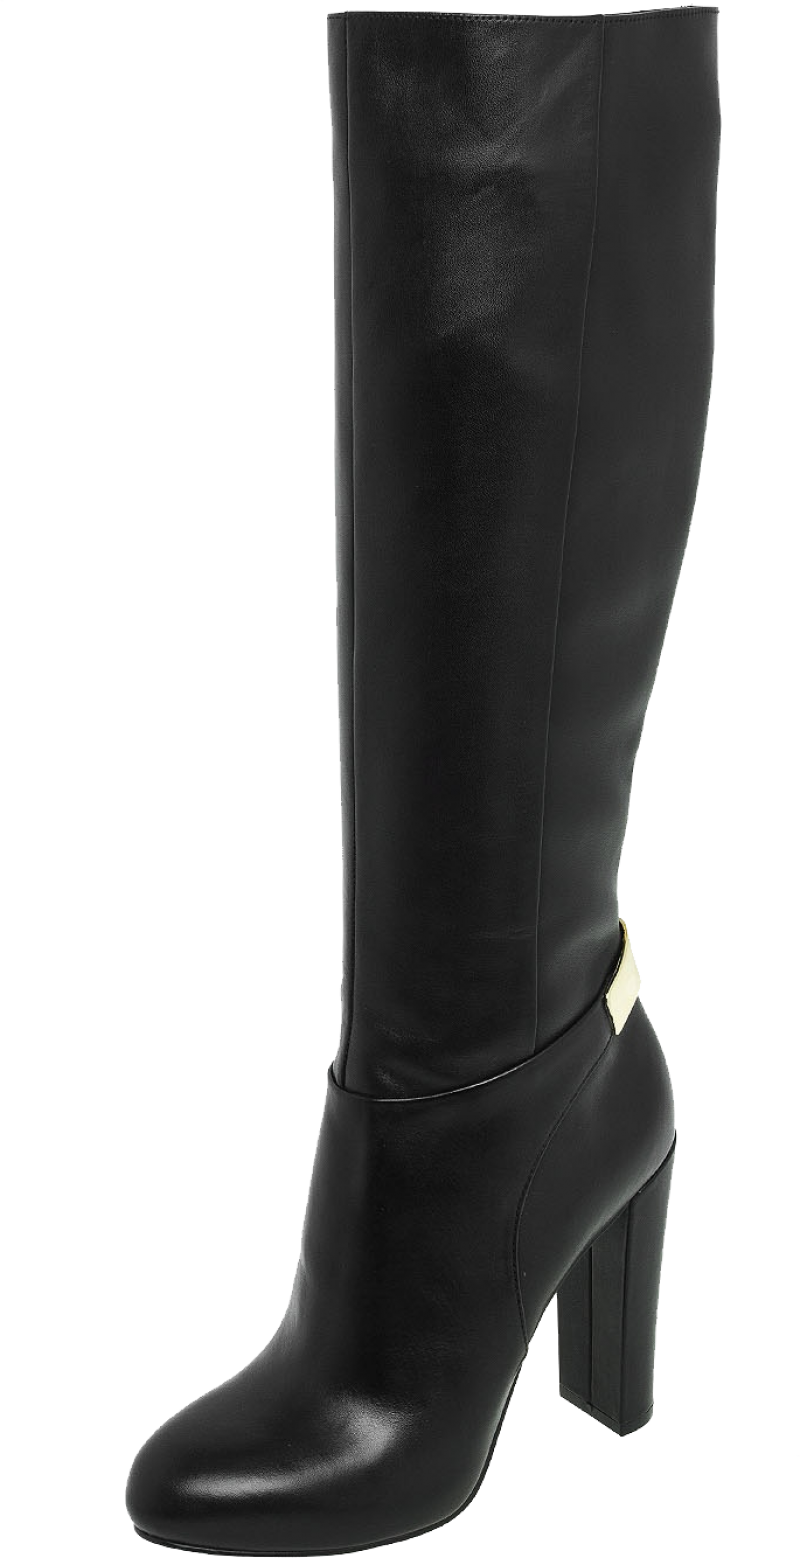 Hugo Boss Boots Womens PNG Image - PurePNG | Free transparent CC0 PNG ...